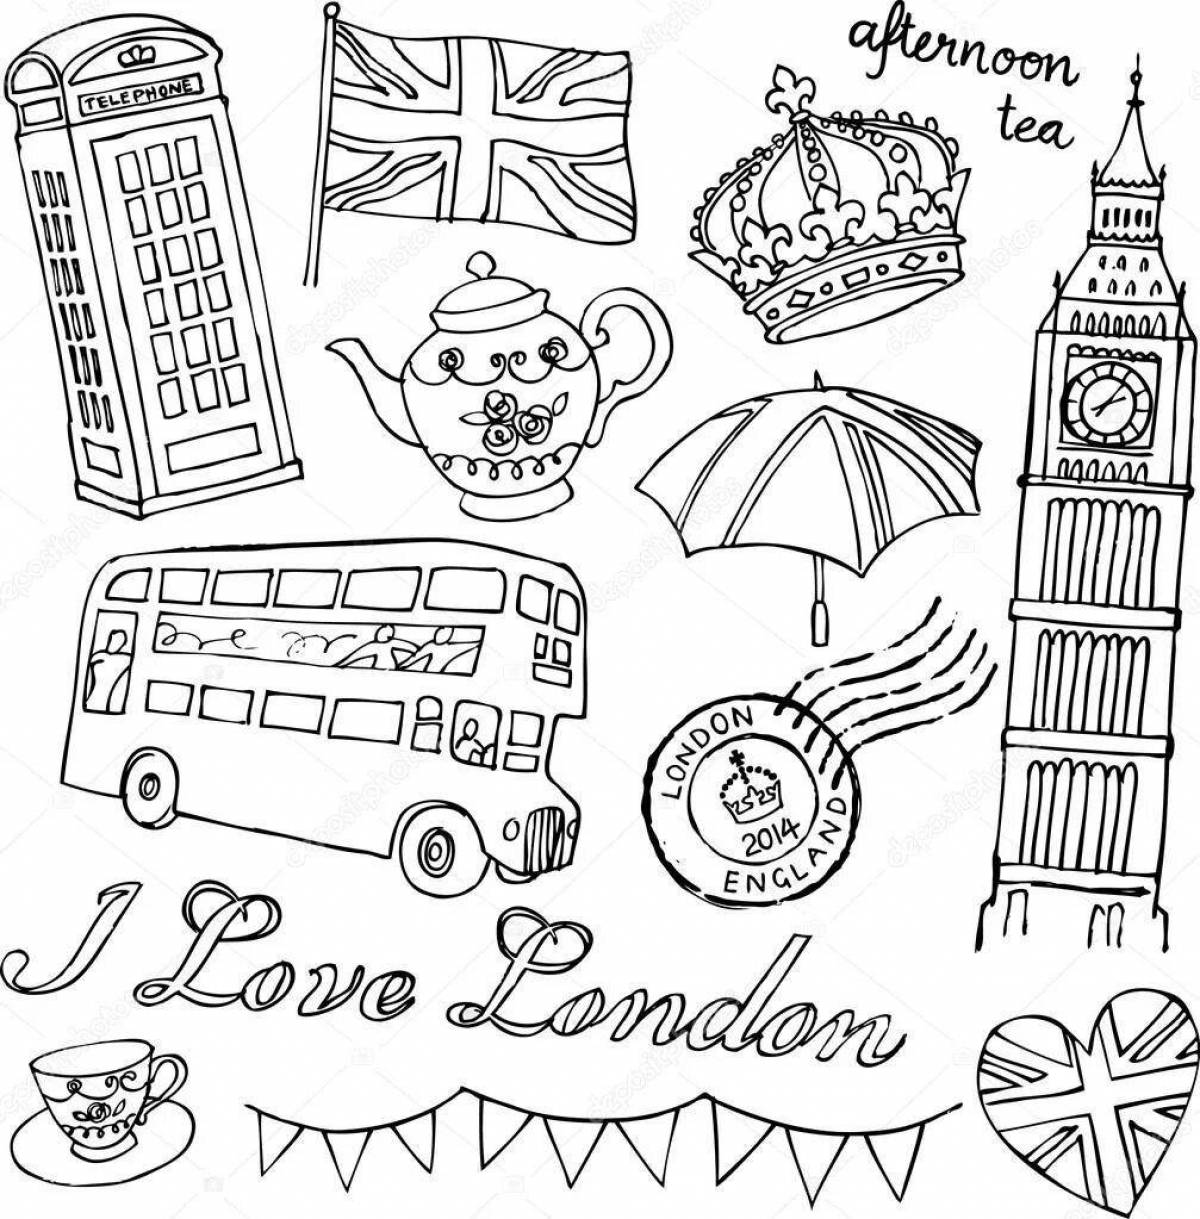 Charming london coloring book for kids